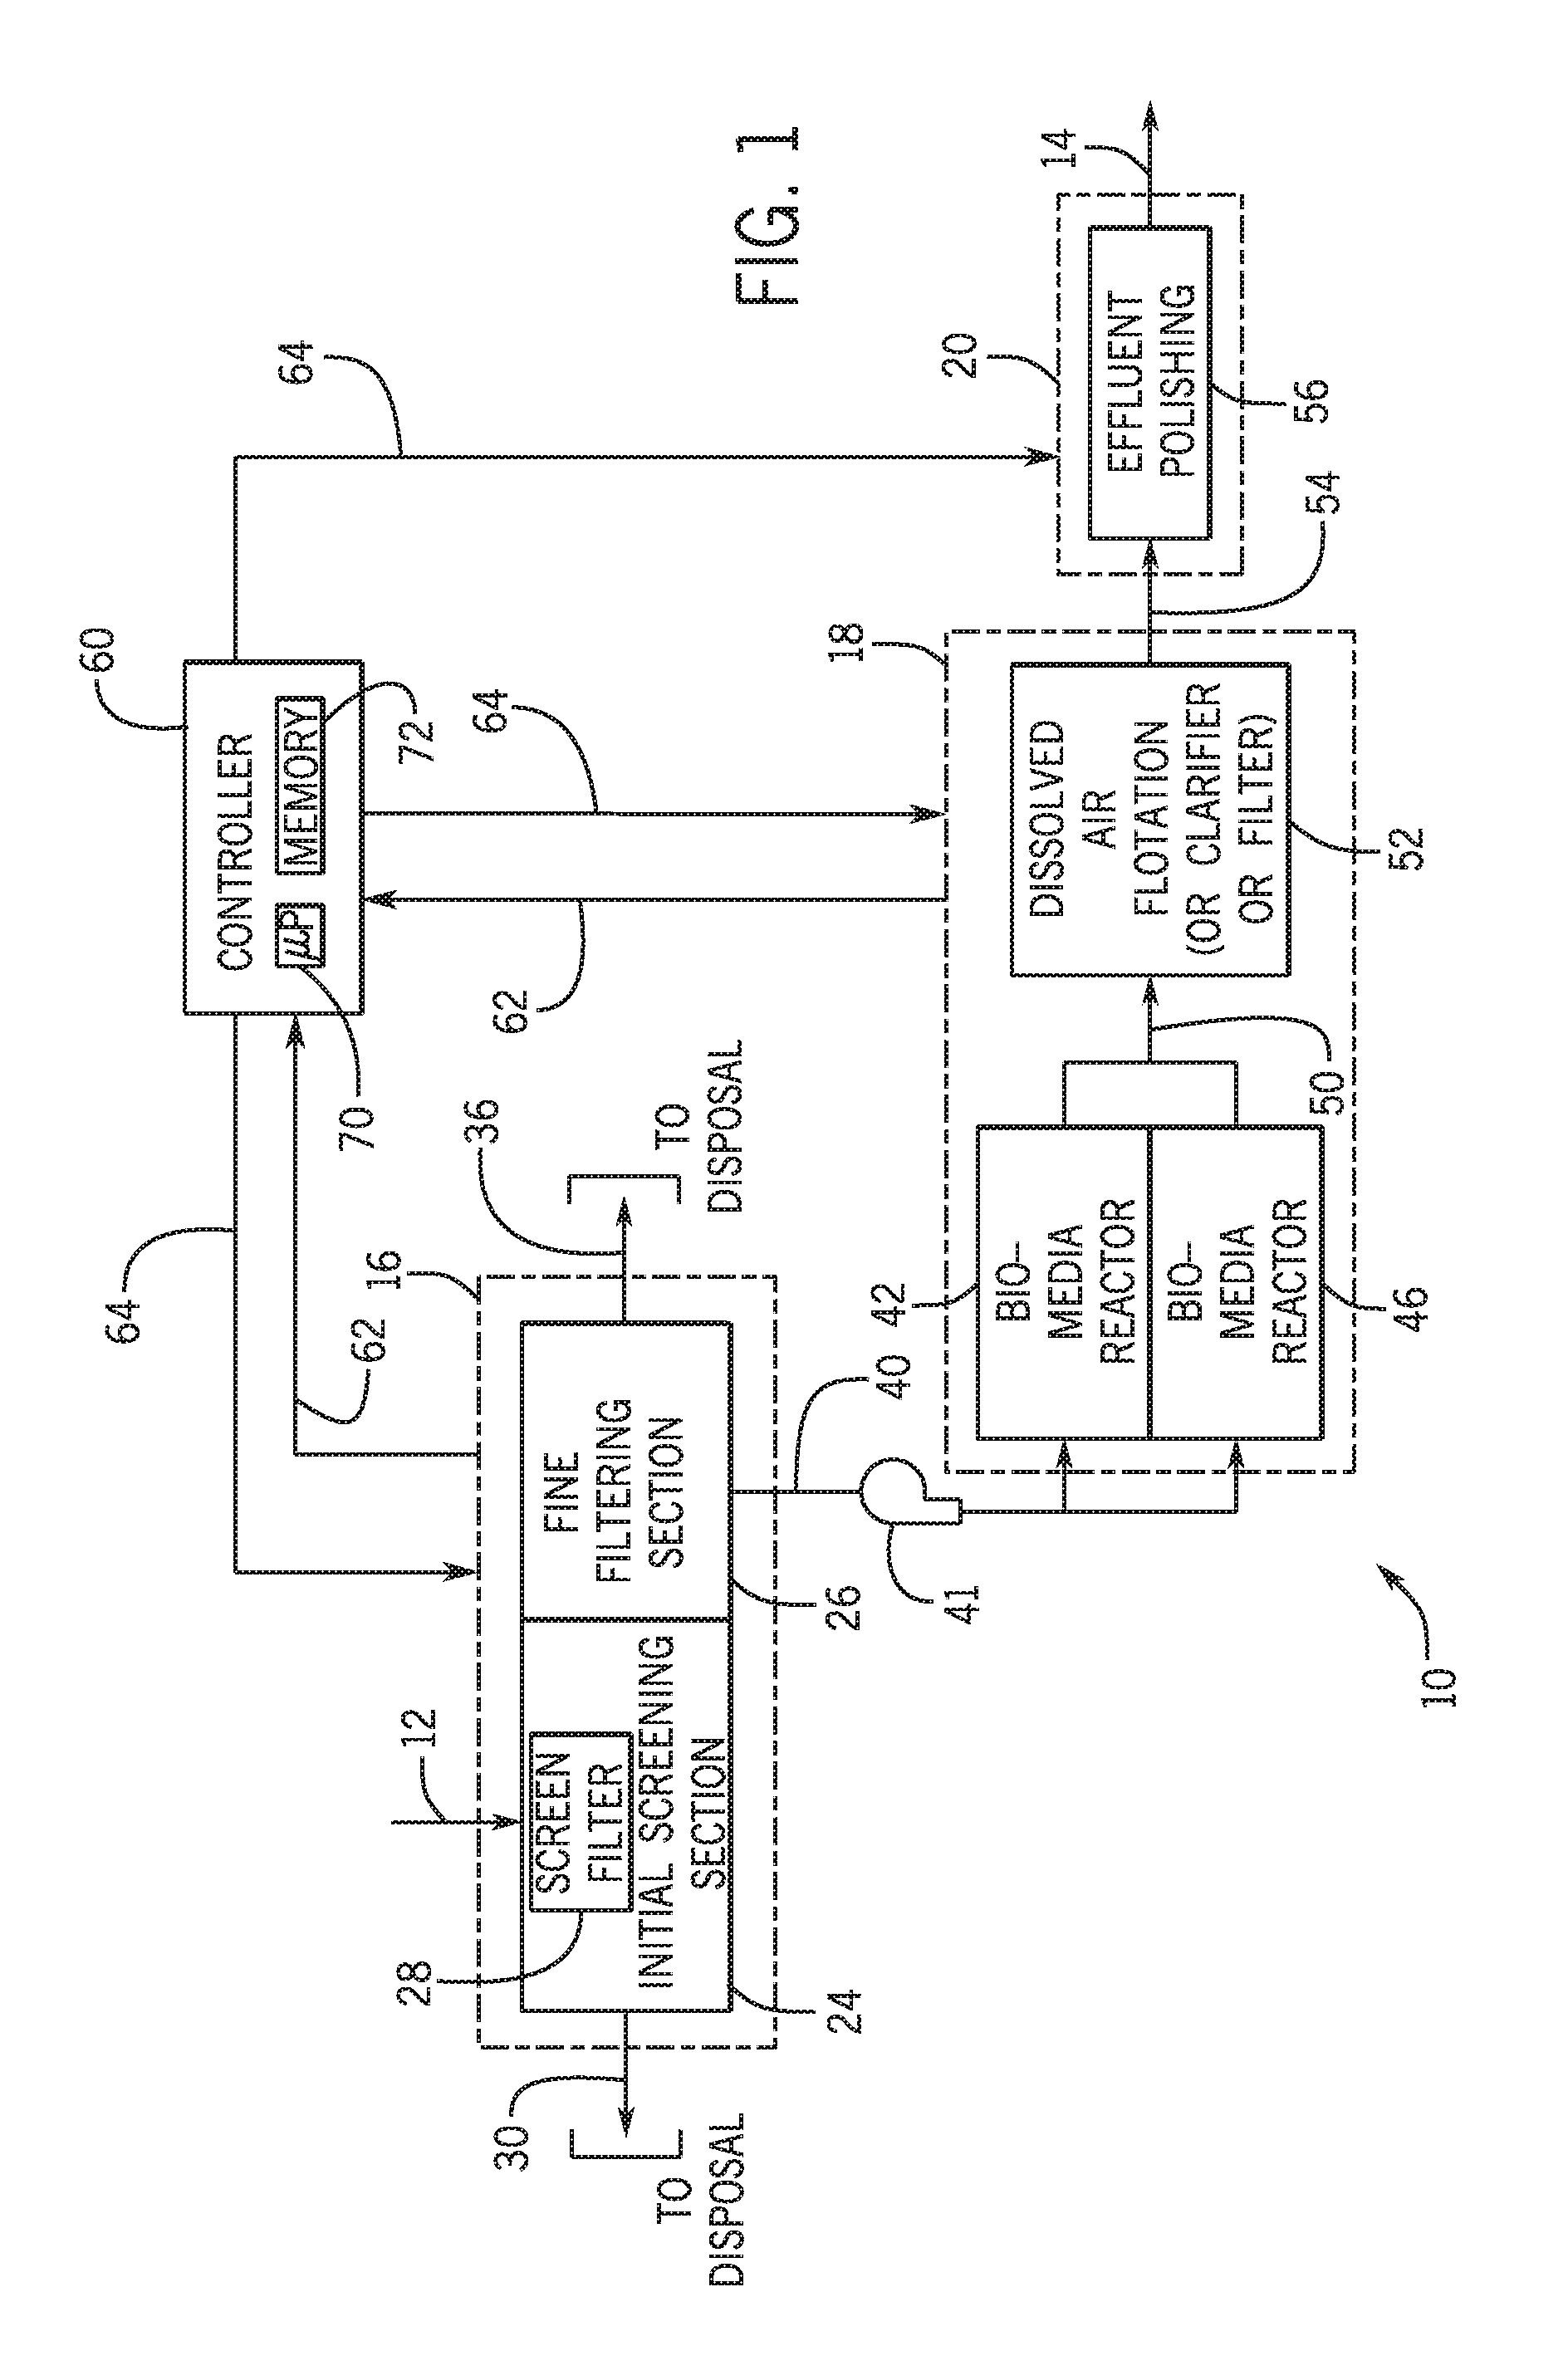 Moving bed biofilm reactor for waste water treatment system